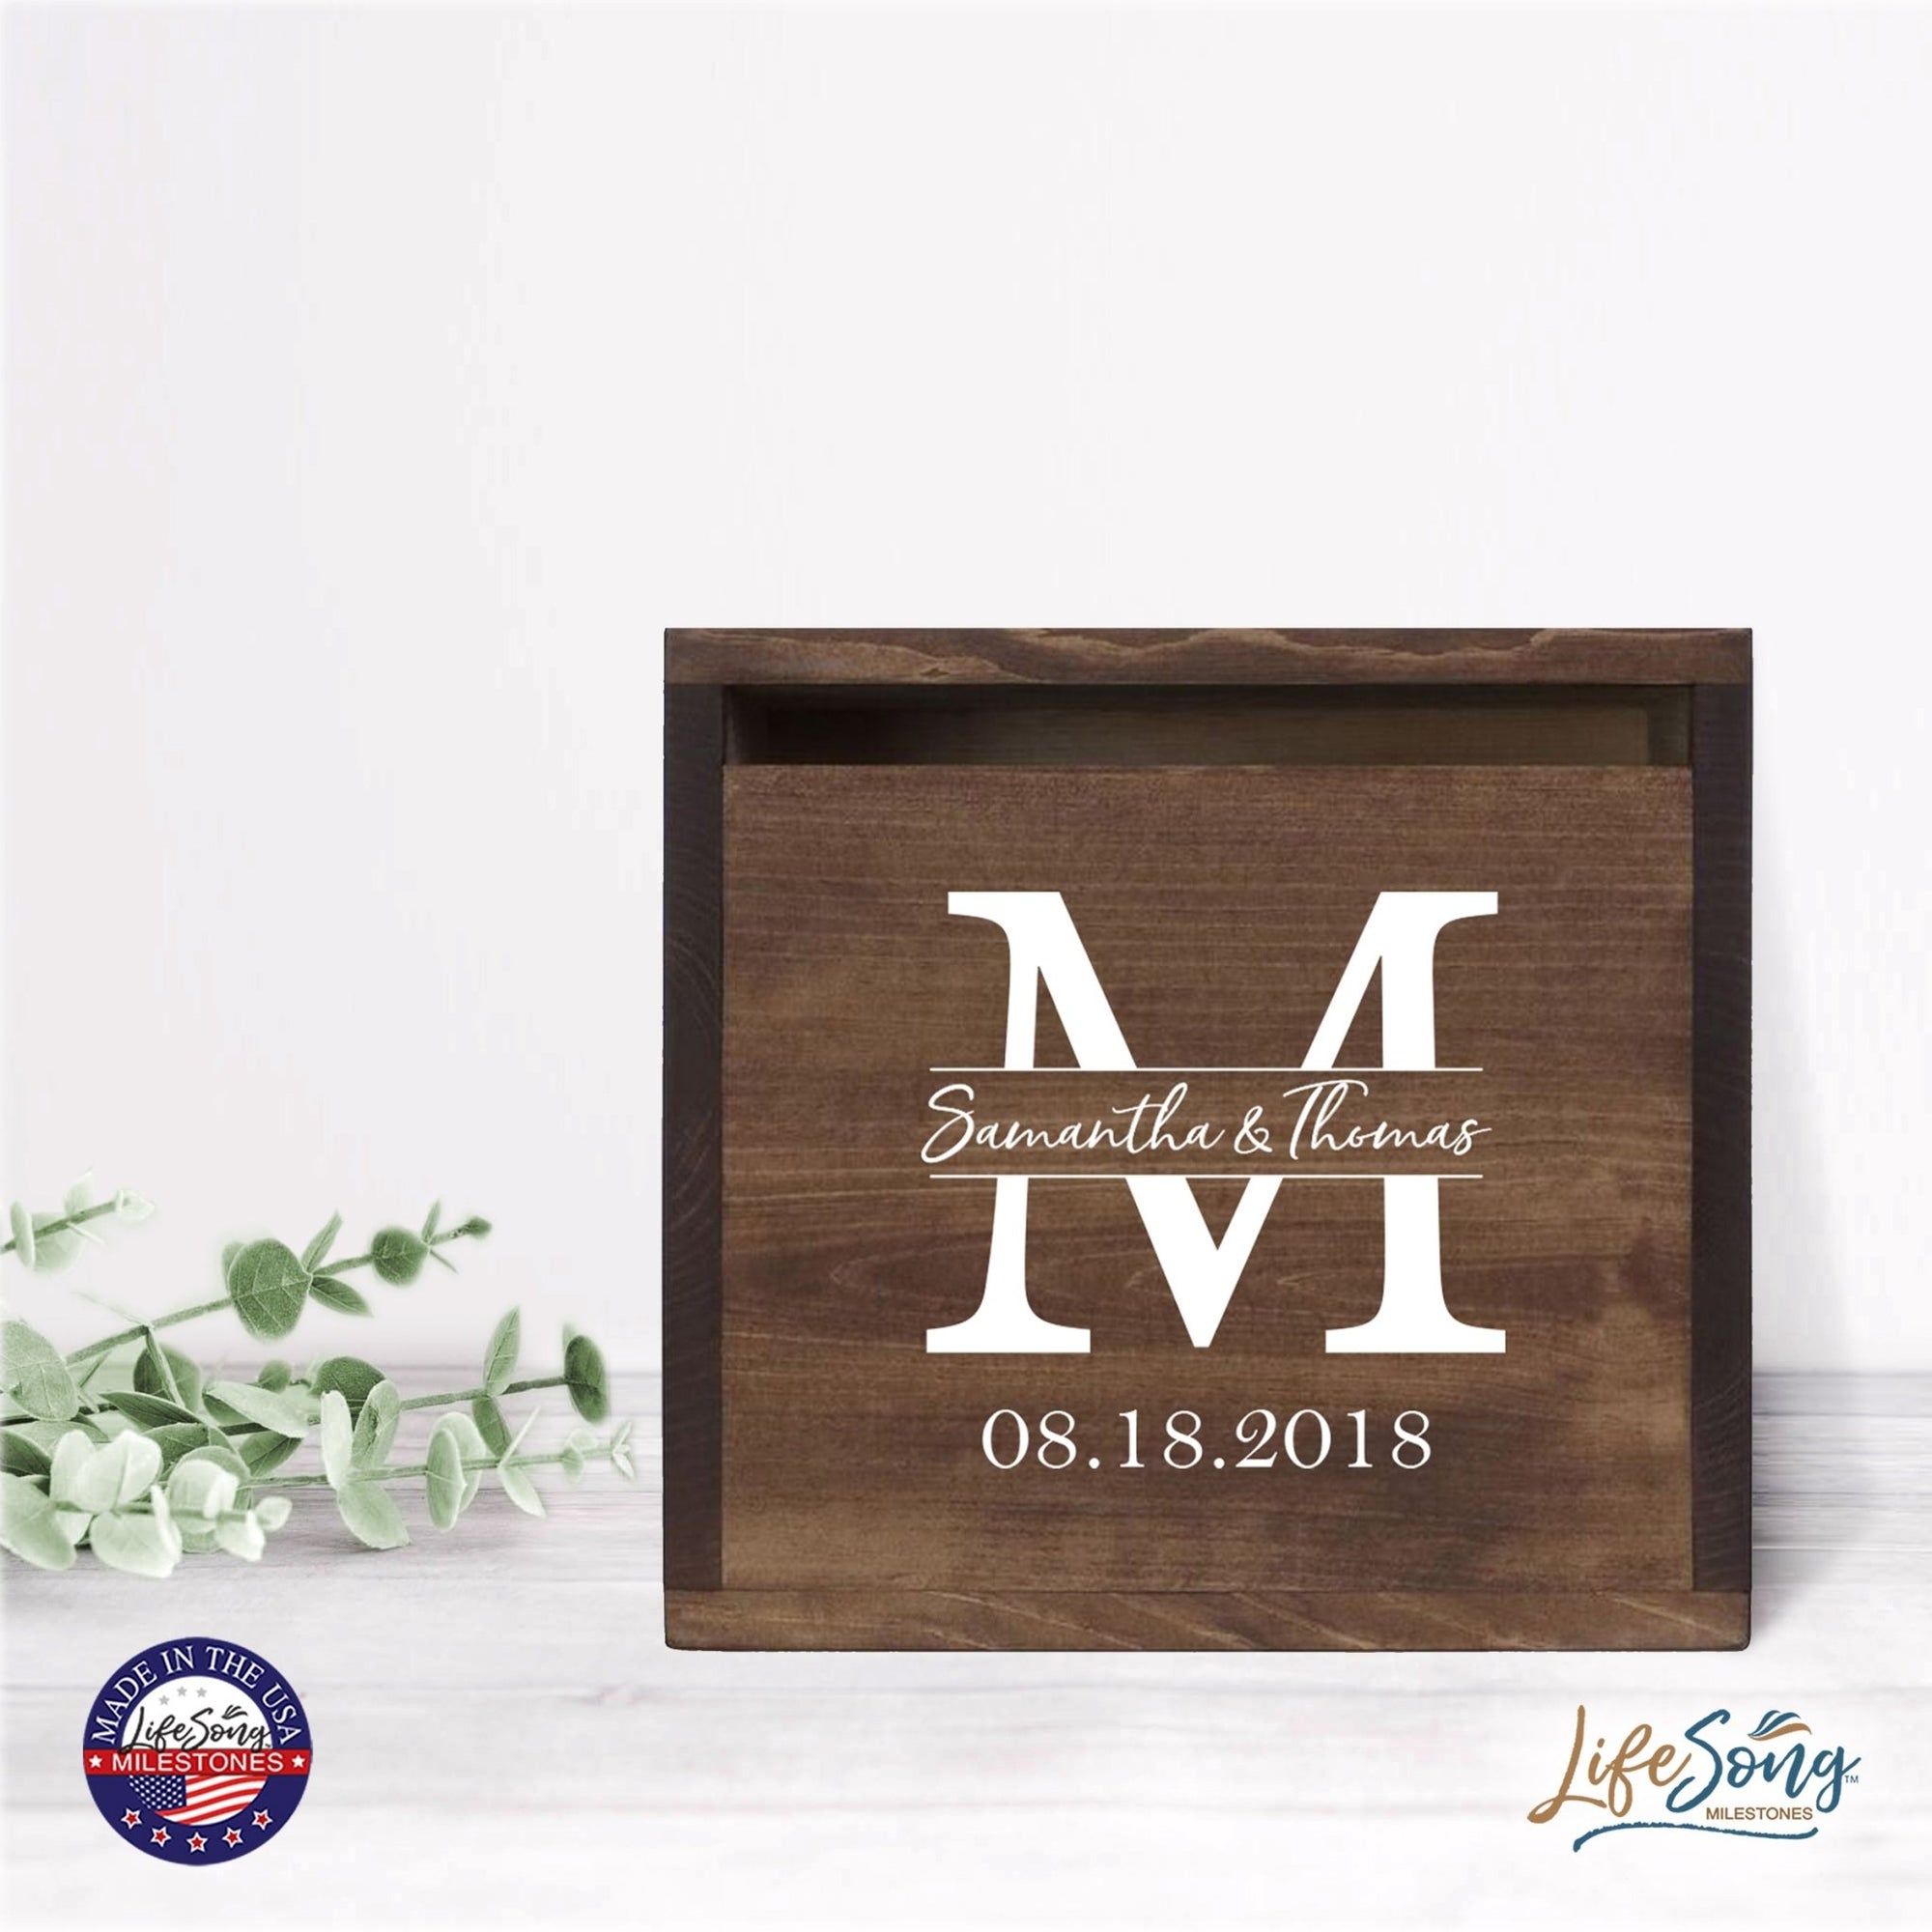 Personalized Wooden Card Box for Wedding Ceremonies, Venues, Receptions, Bridal Showers, and Engagement Parties 13.5x12 - Samatha & Thomas (M) - LifeSong Milestones